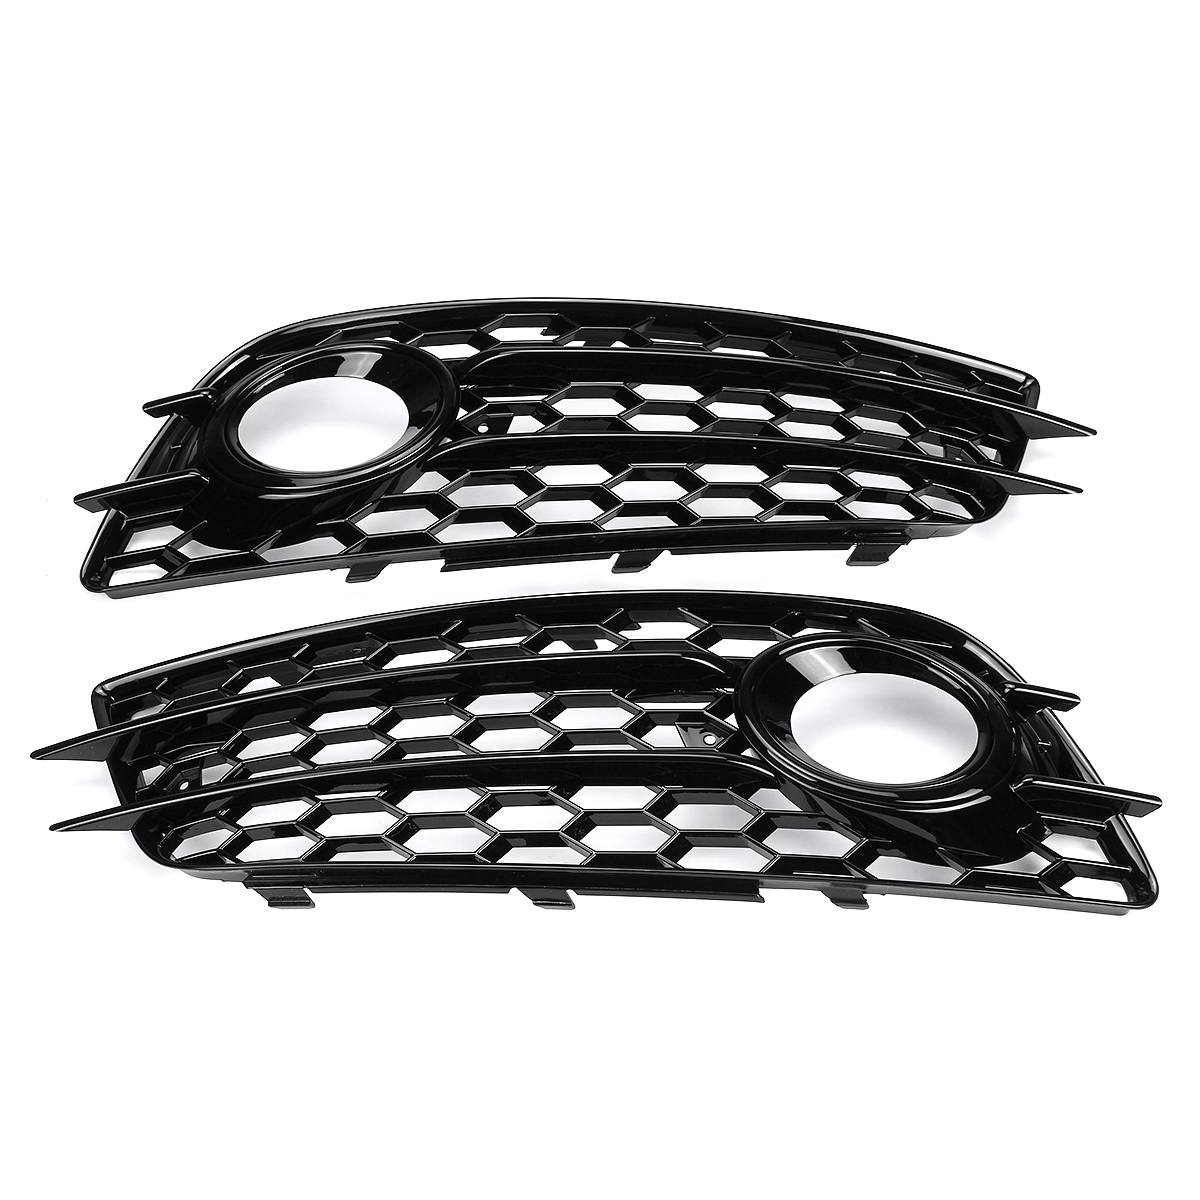 HONEYCOMB HEX Front Grille Grill For Audi A4 B8 S-Line S4 2008-2012 ...